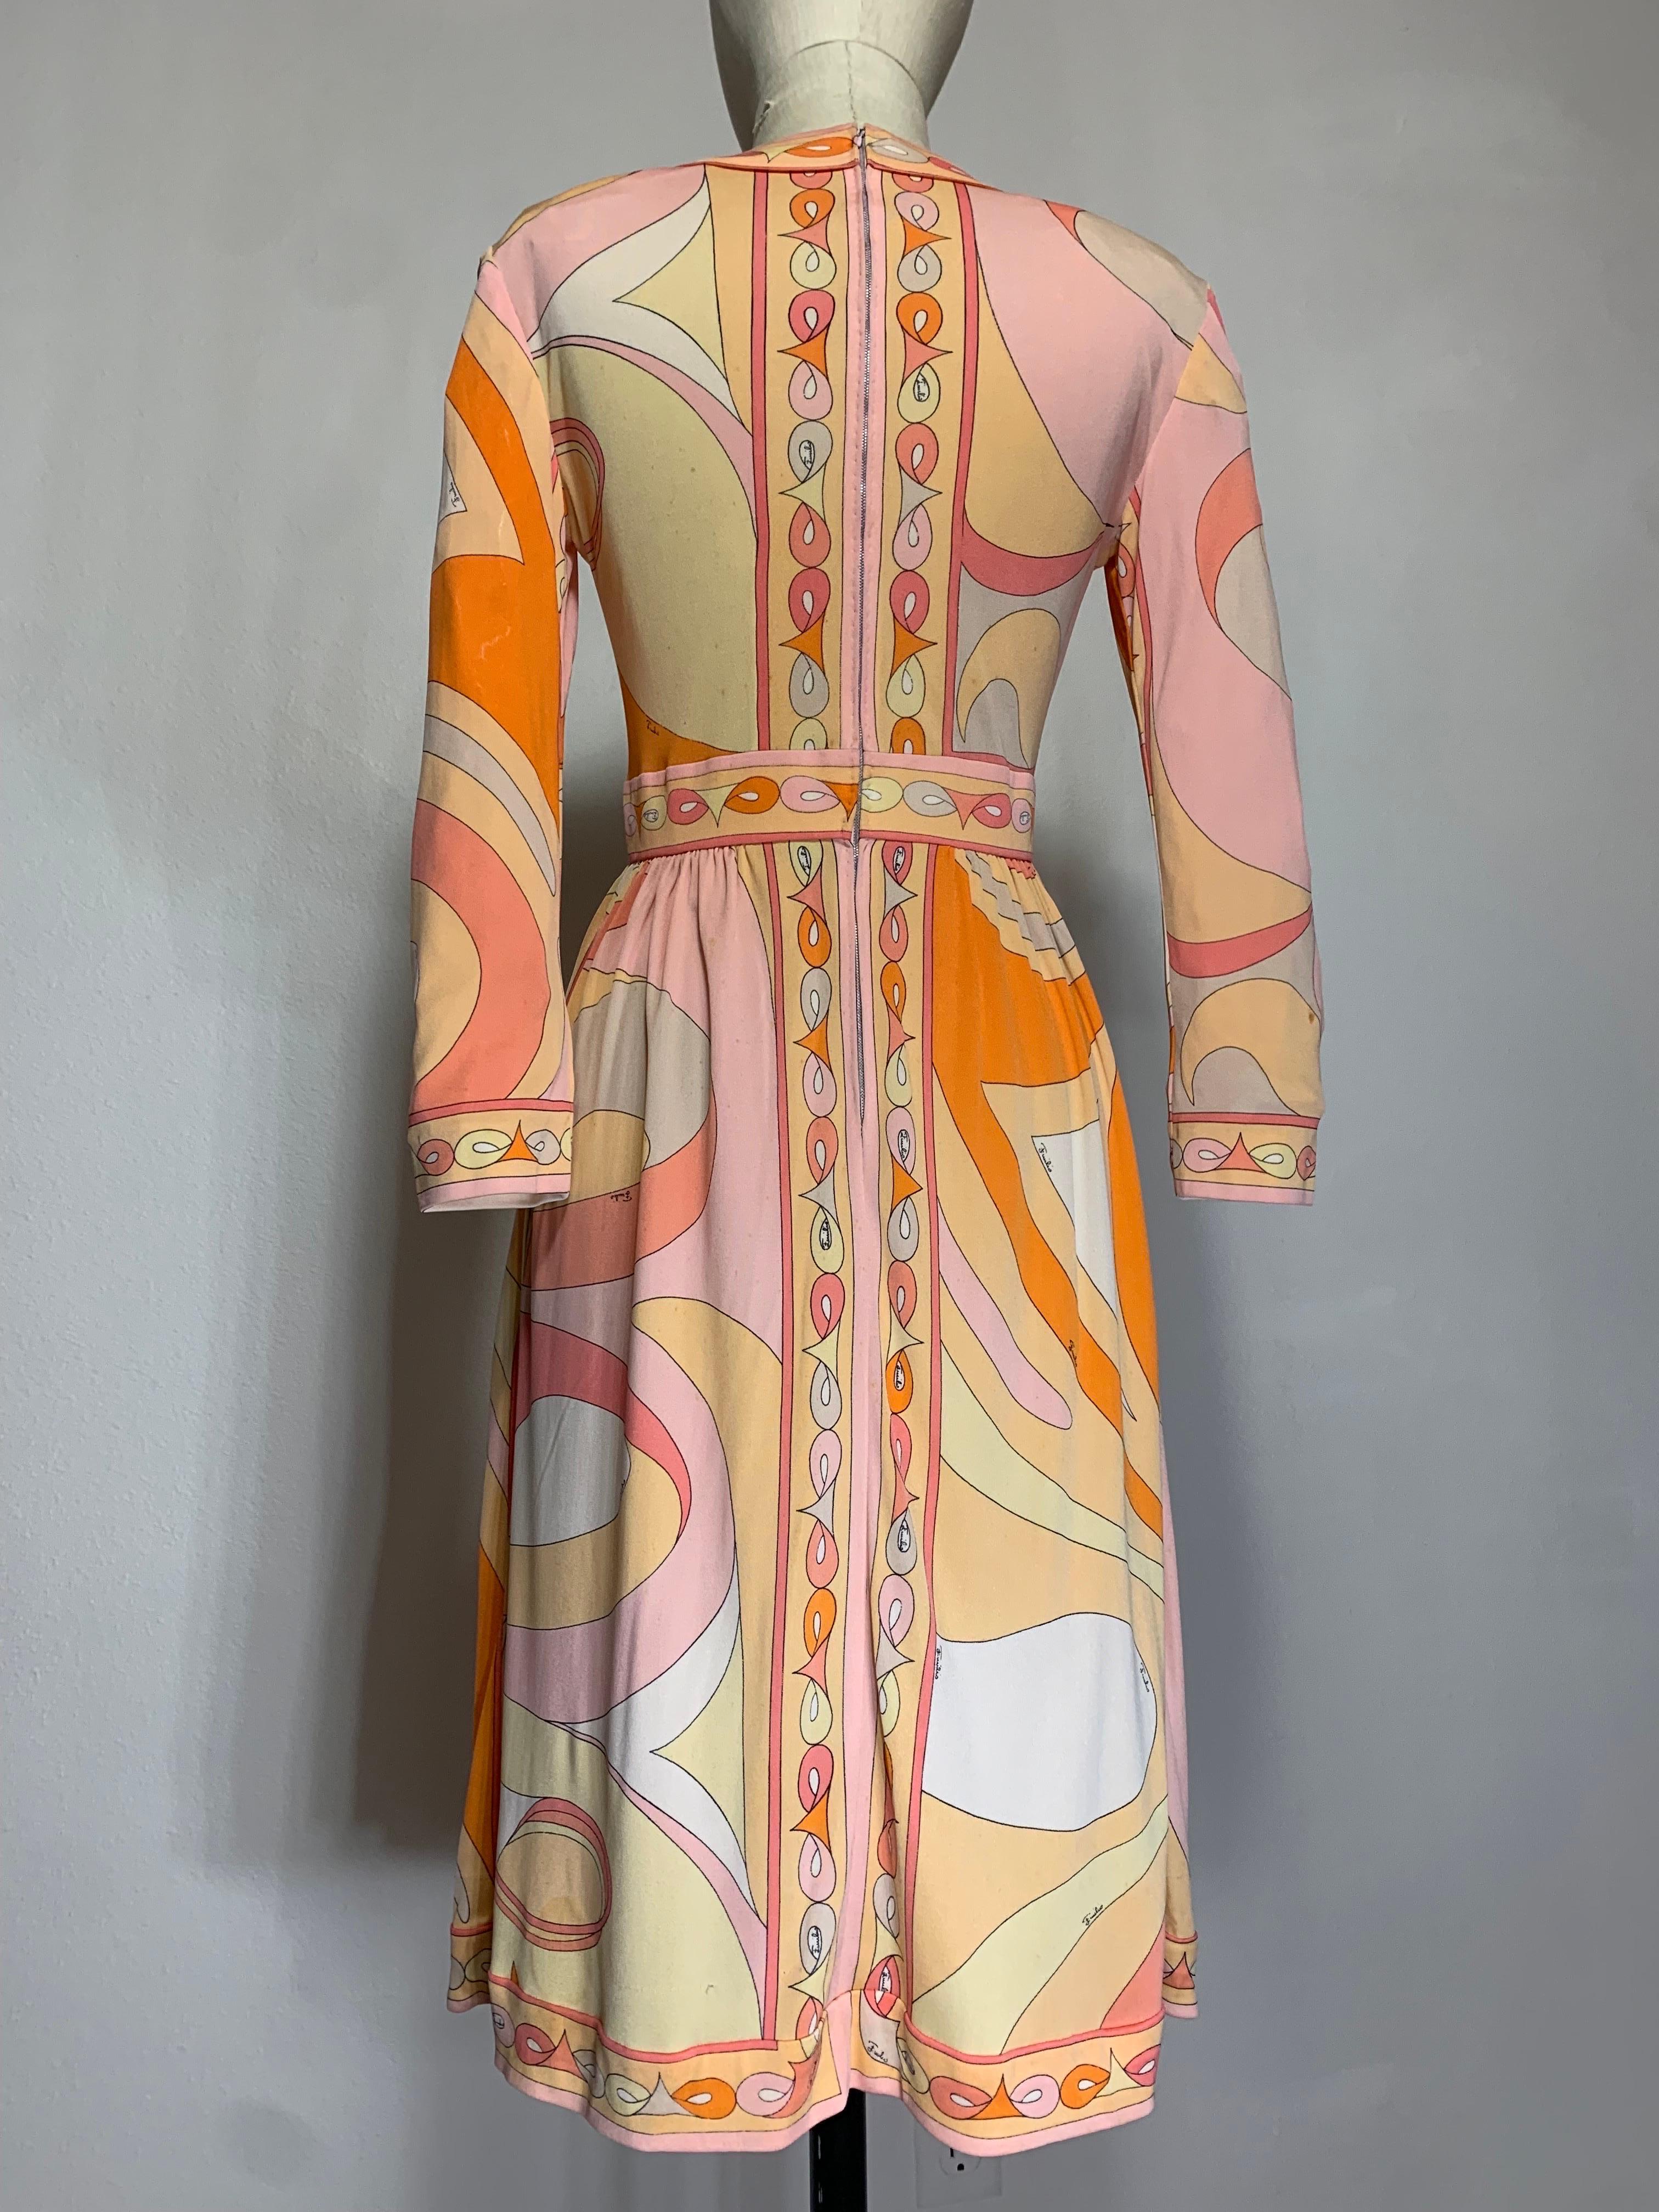 1960s Emilio Pucci Psychedelic Print Mod Day Dress w Full Skirt in Tangerine  For Sale 10